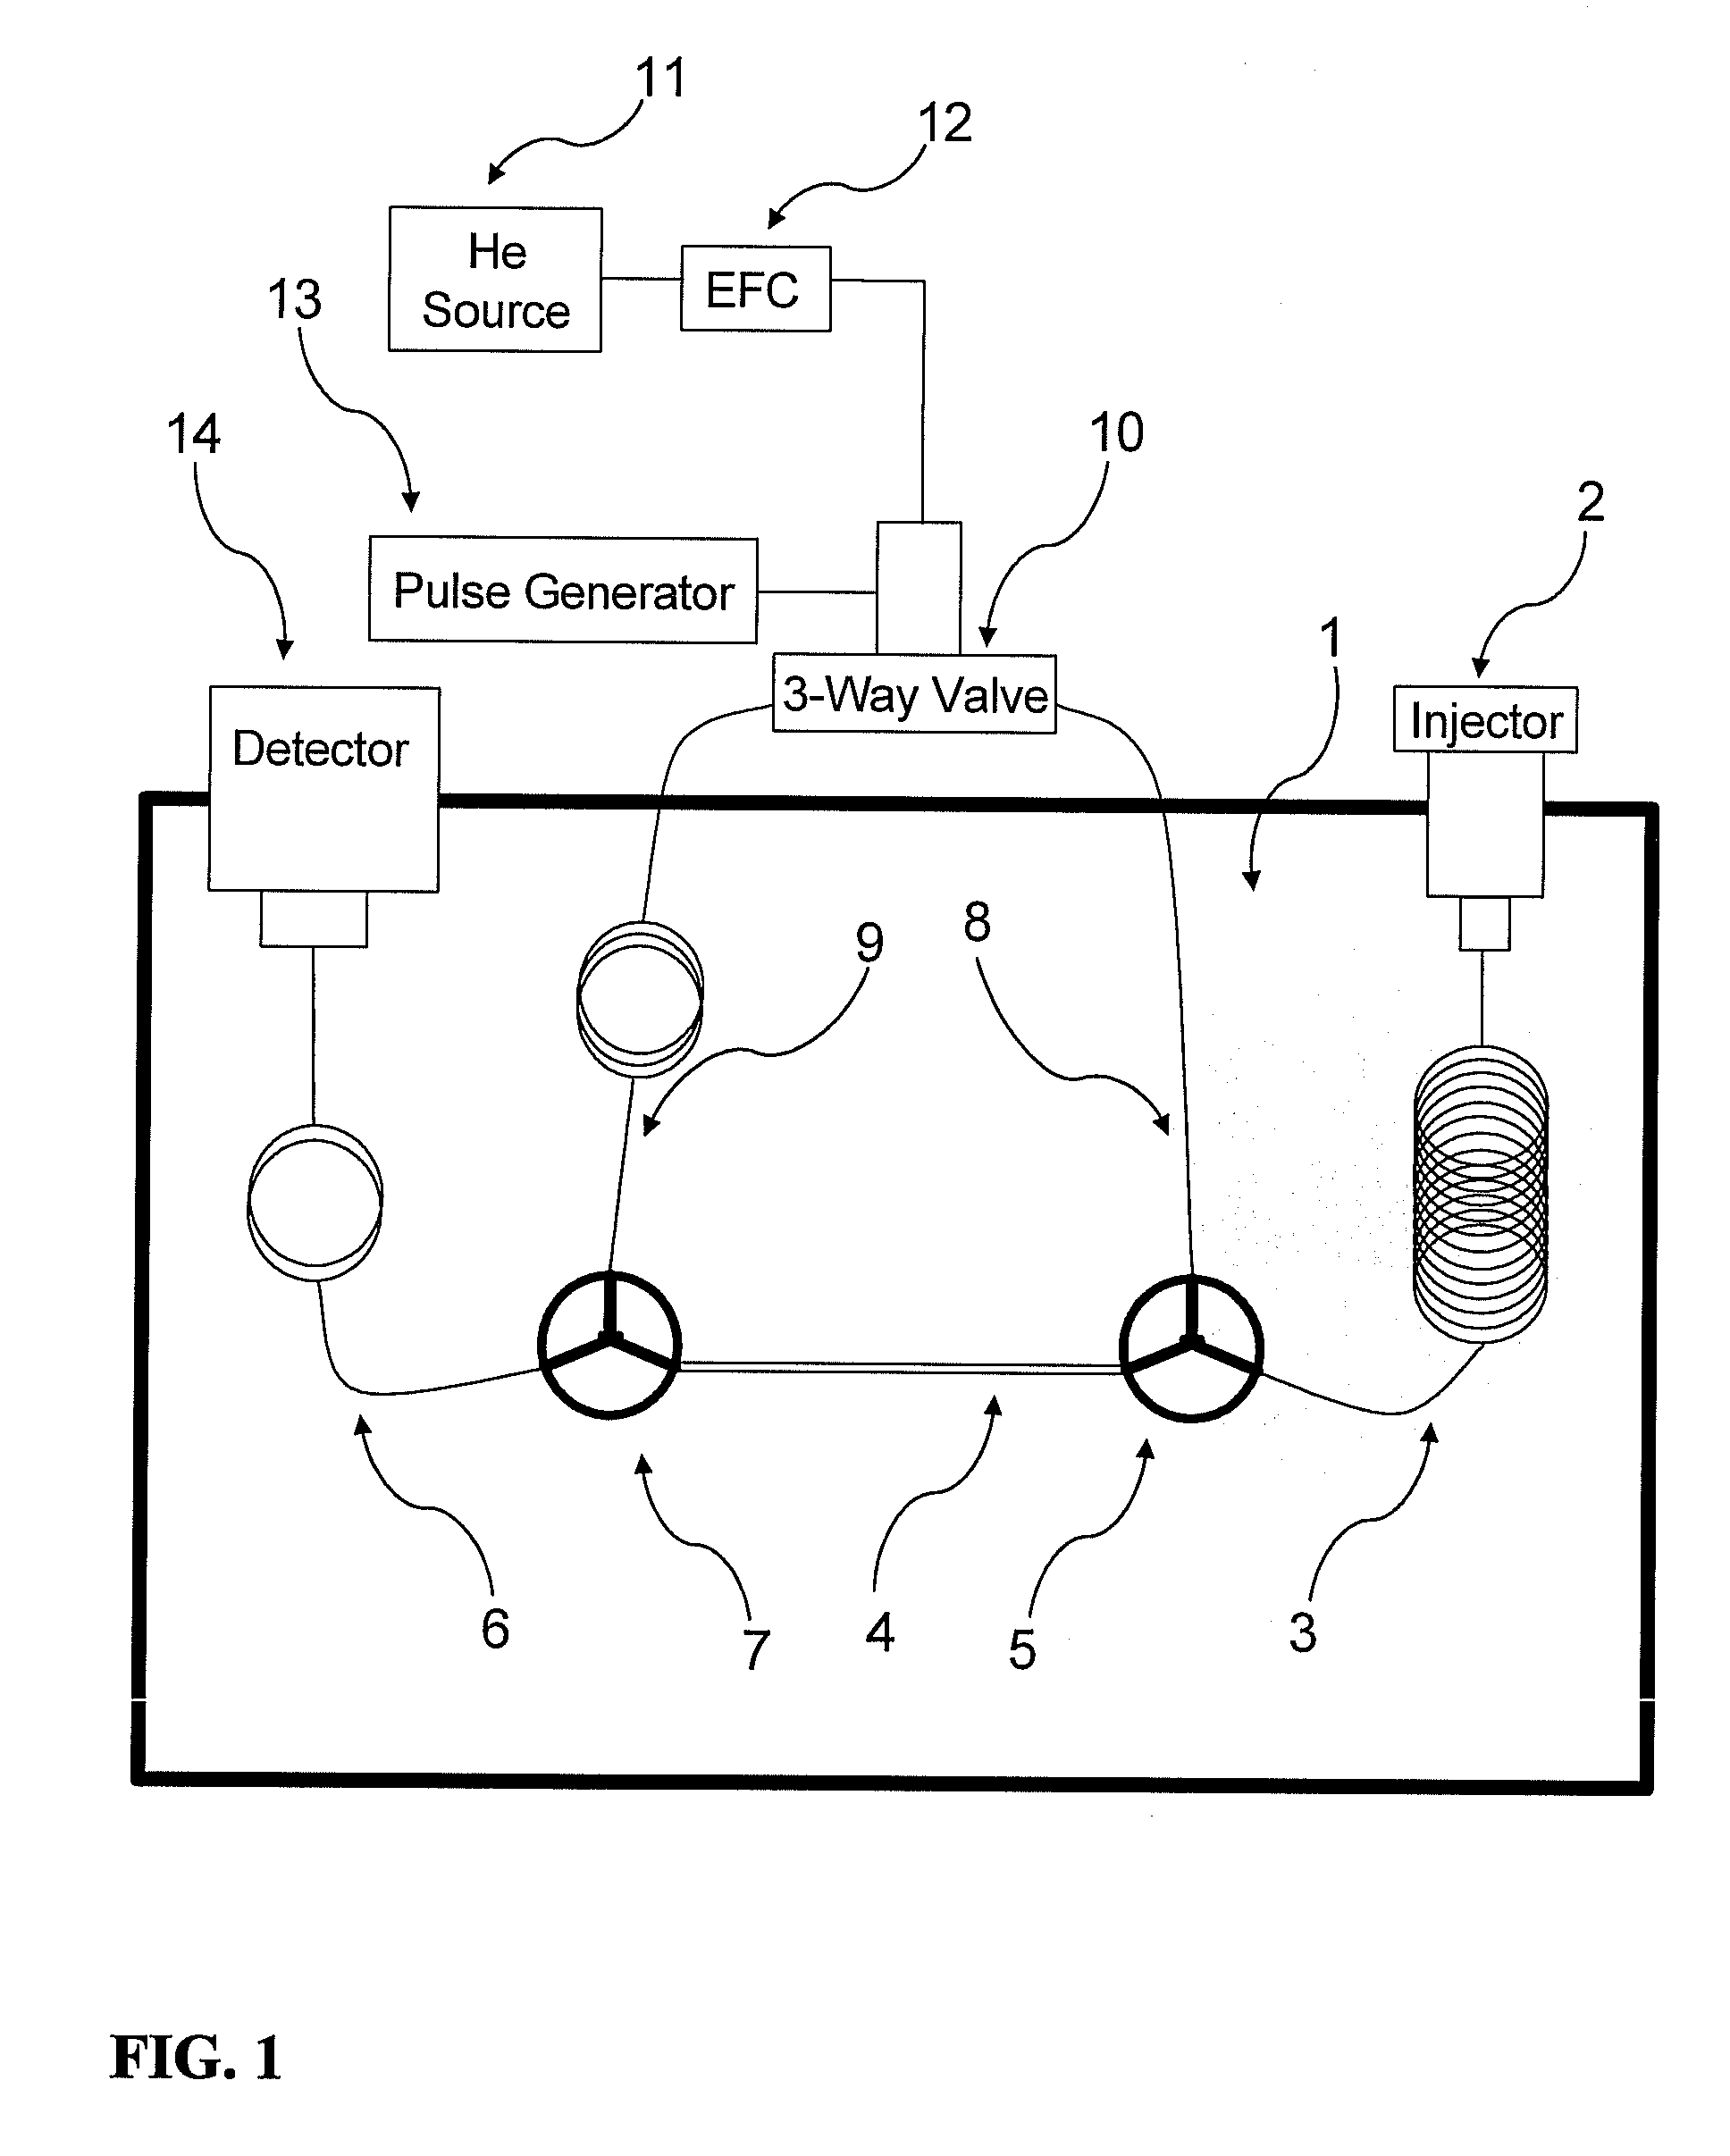 Pulsed flow modulation gas chromatography mass spectrometry with supersonic molecular beams method and apparatus